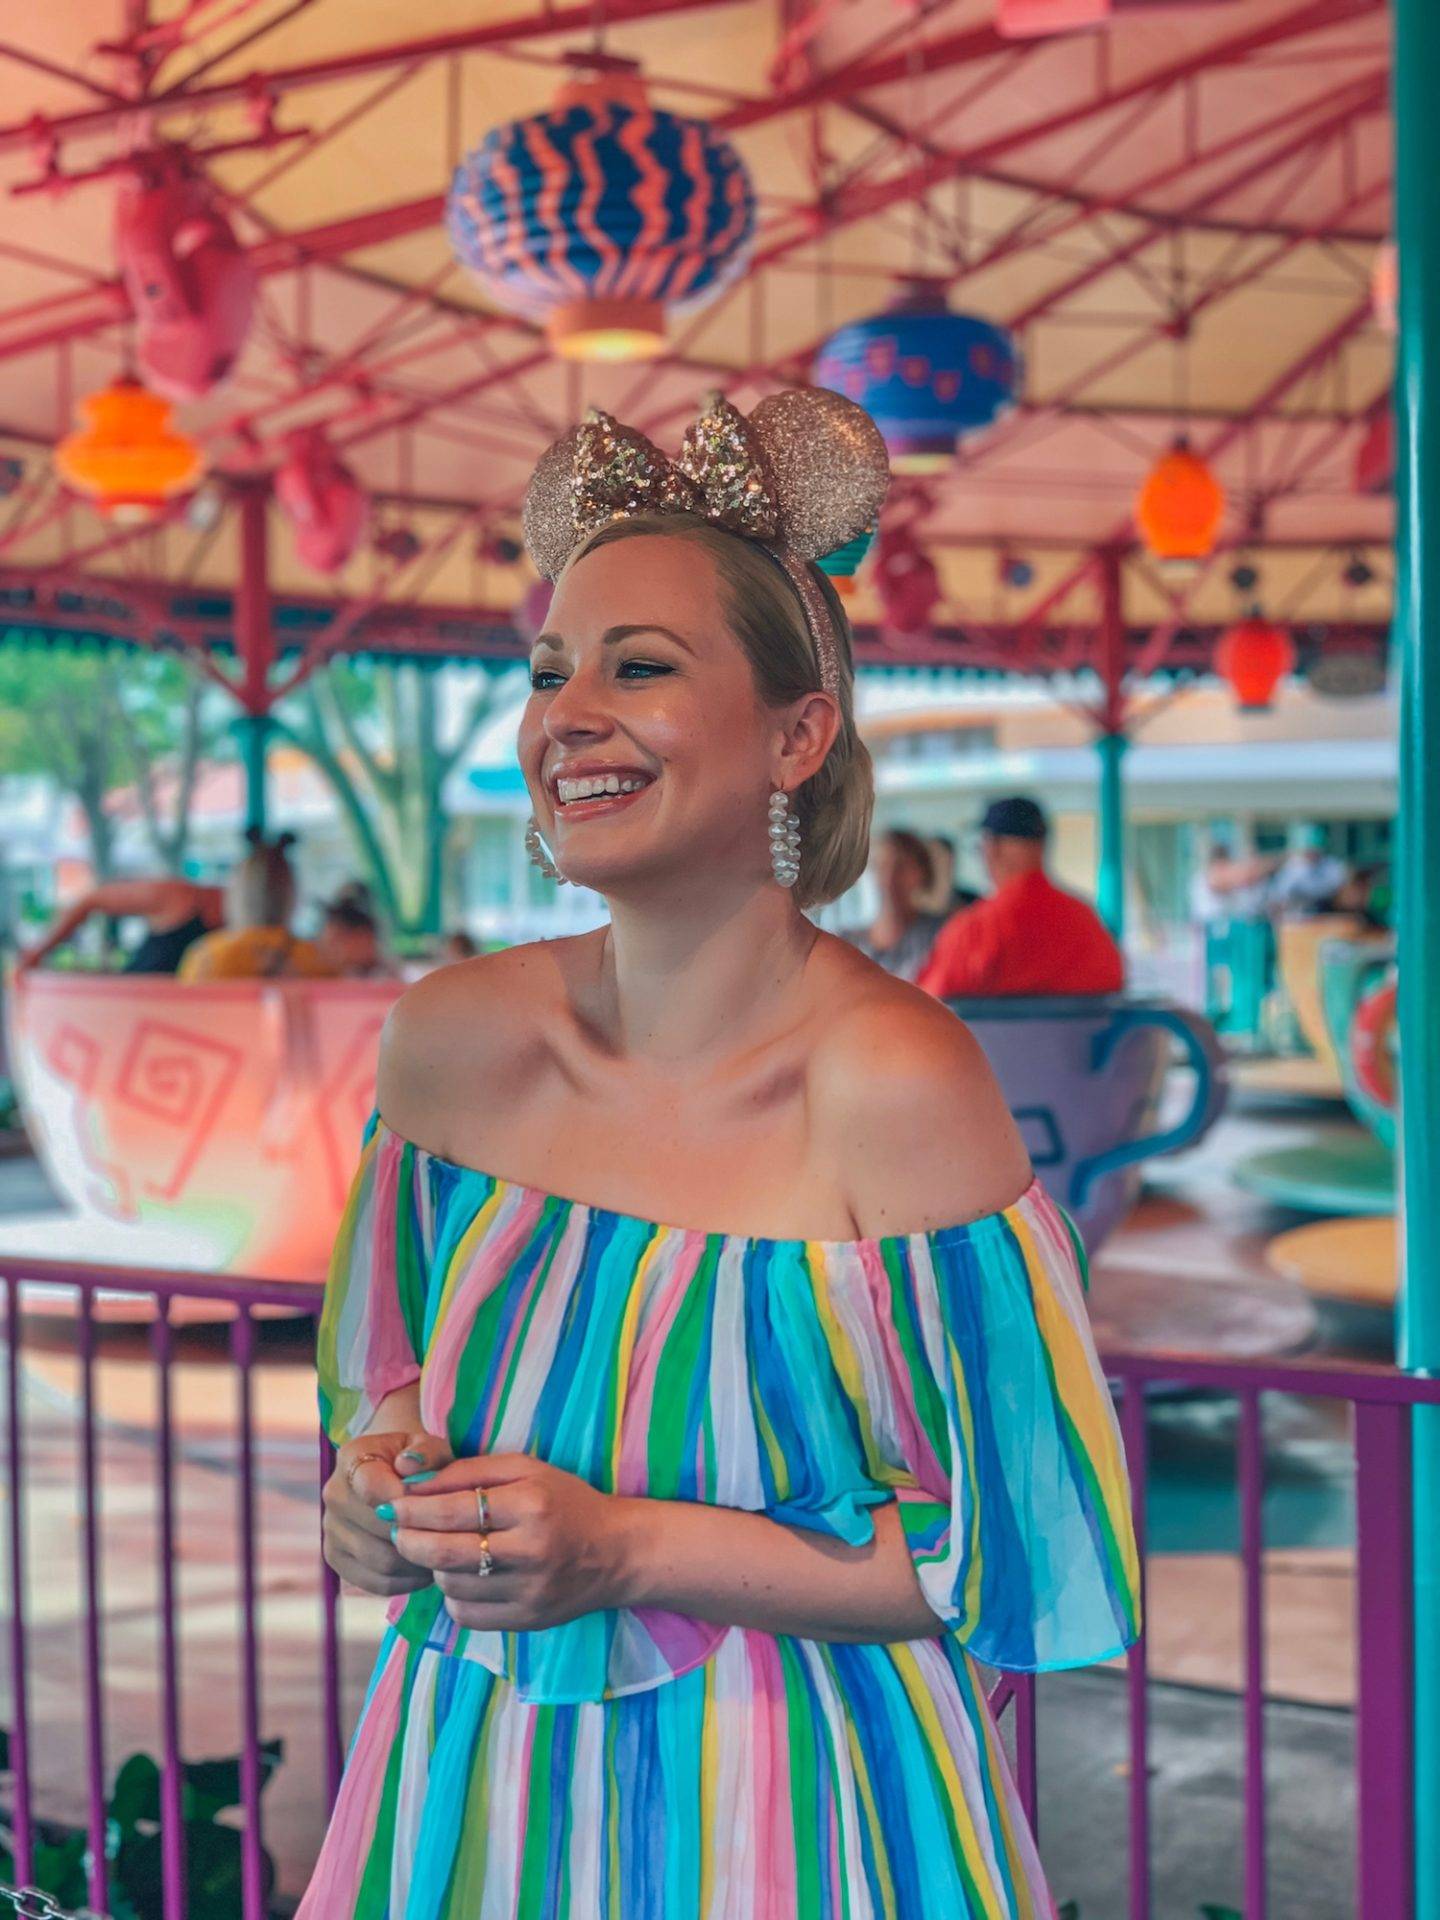 Mad Hatters Tea Party ride at Disney World. Click the photo for a complete guide on how to get the perfect photo at Disney! Includes a list of all the top Disney World photo spots. via www.kirstenwendlandt.com